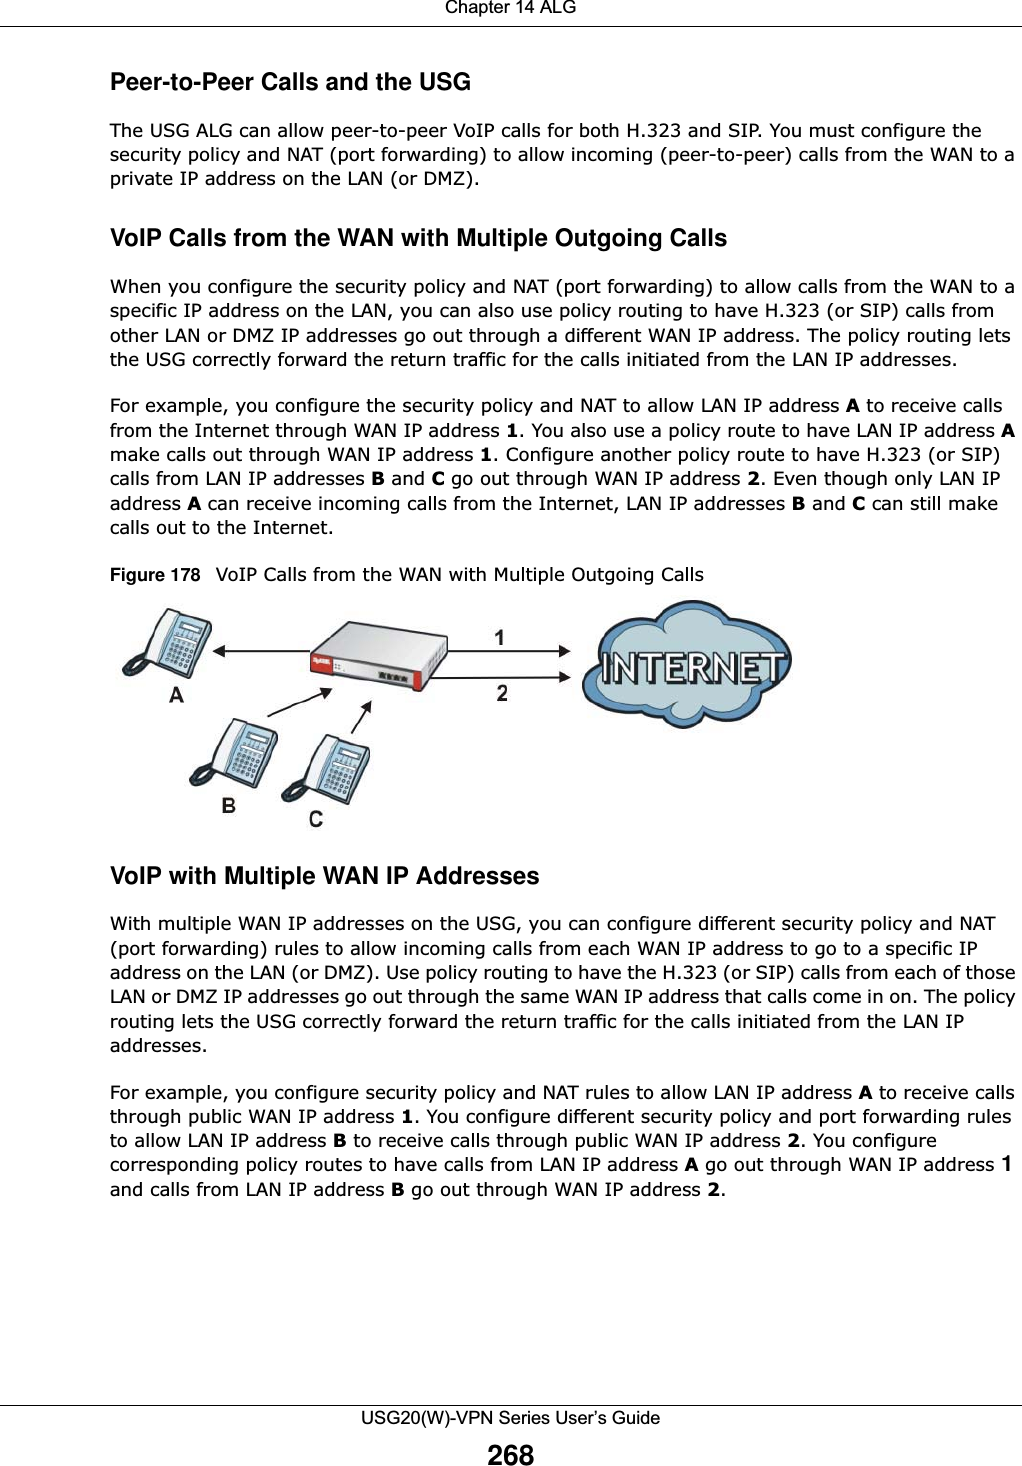 Chapter 14 ALGUSG20(W)-VPN Series User’s Guide268Peer-to-Peer Calls and the USGThe USG ALG can allow peer-to-peer VoIP calls for both H.323 and SIP. You must configure the security policy and NAT (port forwarding) to allow incoming (peer-to-peer) calls from the WAN to a private IP address on the LAN (or DMZ). VoIP Calls from the WAN with Multiple Outgoing CallsWhen you configure the security policy and NAT (port forwarding) to allow calls from the WAN to a specific IP address on the LAN, you can also use policy routing to have H.323 (or SIP) calls from other LAN or DMZ IP addresses go out through a different WAN IP address. The policy routing lets the USG correctly forward the return traffic for the calls initiated from the LAN IP addresses. For example, you configure the security policy and NAT to allow LAN IP address A to receive calls from the Internet through WAN IP address 1. You also use a policy route to have LAN IP address Amake calls out through WAN IP address 1. Configure another policy route to have H.323 (or SIP) calls from LAN IP addresses B and C go out through WAN IP address 2. Even though only LAN IP address Acan receive incoming calls from the Internet, LAN IP addresses B and C can still make calls out to the Internet. Figure 178   VoIP Calls from the WAN with Multiple Outgoing CallsVoIP with Multiple WAN IP AddressesWith multiple WAN IP addresses on the USG, you can configure different security policy and NAT (port forwarding) rules to allow incoming calls from each WAN IP address to go to a specific IP address on the LAN (or DMZ). Use policy routing to have the H.323 (or SIP) calls from each of those LAN or DMZ IP addresses go out through the same WAN IP address that calls come in on. The policy routing lets the USG correctly forward the return traffic for the calls initiated from the LAN IP addresses.For example, you configure security policy and NAT rules to allow LAN IP address A to receive calls through public WAN IP address 1. You configure different security policy and port forwarding rules to allow LAN IP address B to receive calls through public WAN IP address 2. You configure corresponding policy routes to have calls from LAN IP address Ago out through WAN IP address 1 and calls from LAN IP address B go out through WAN IP address 2. 